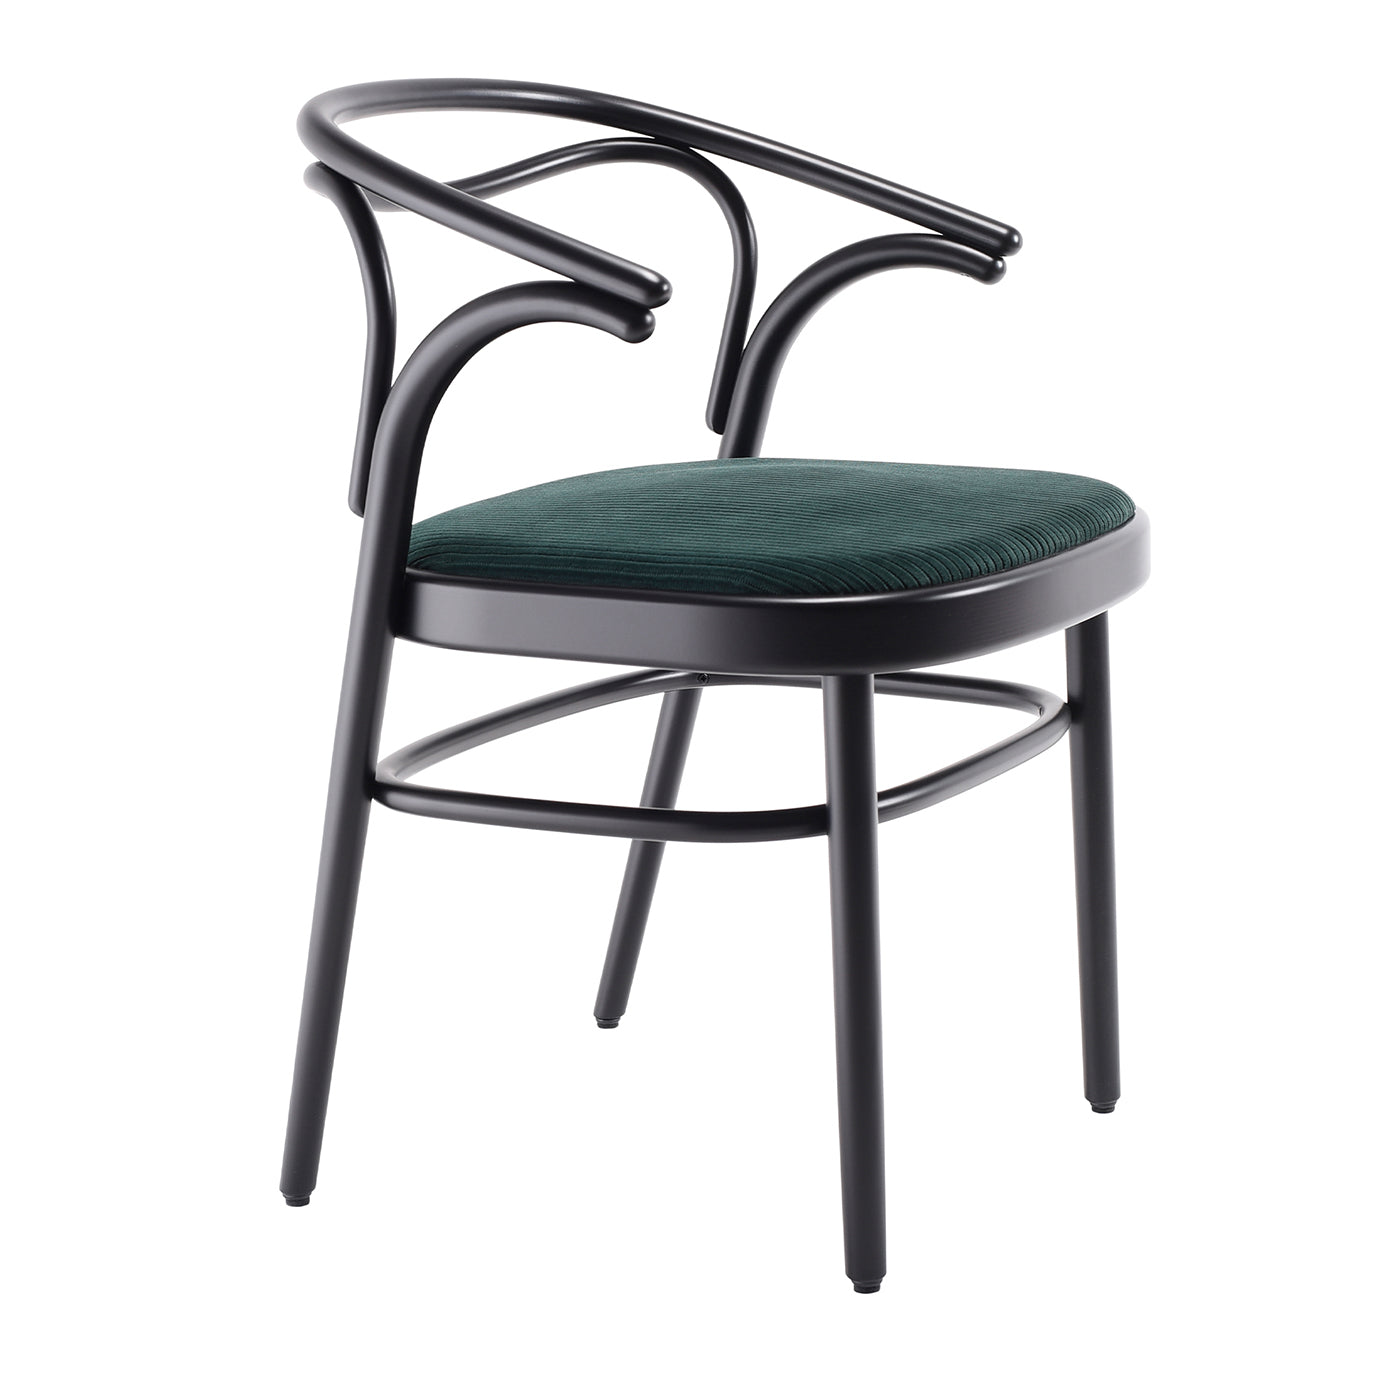 BEAULIEU dining chair with upholstered seat by PHILIPPE NIGRO - Main view